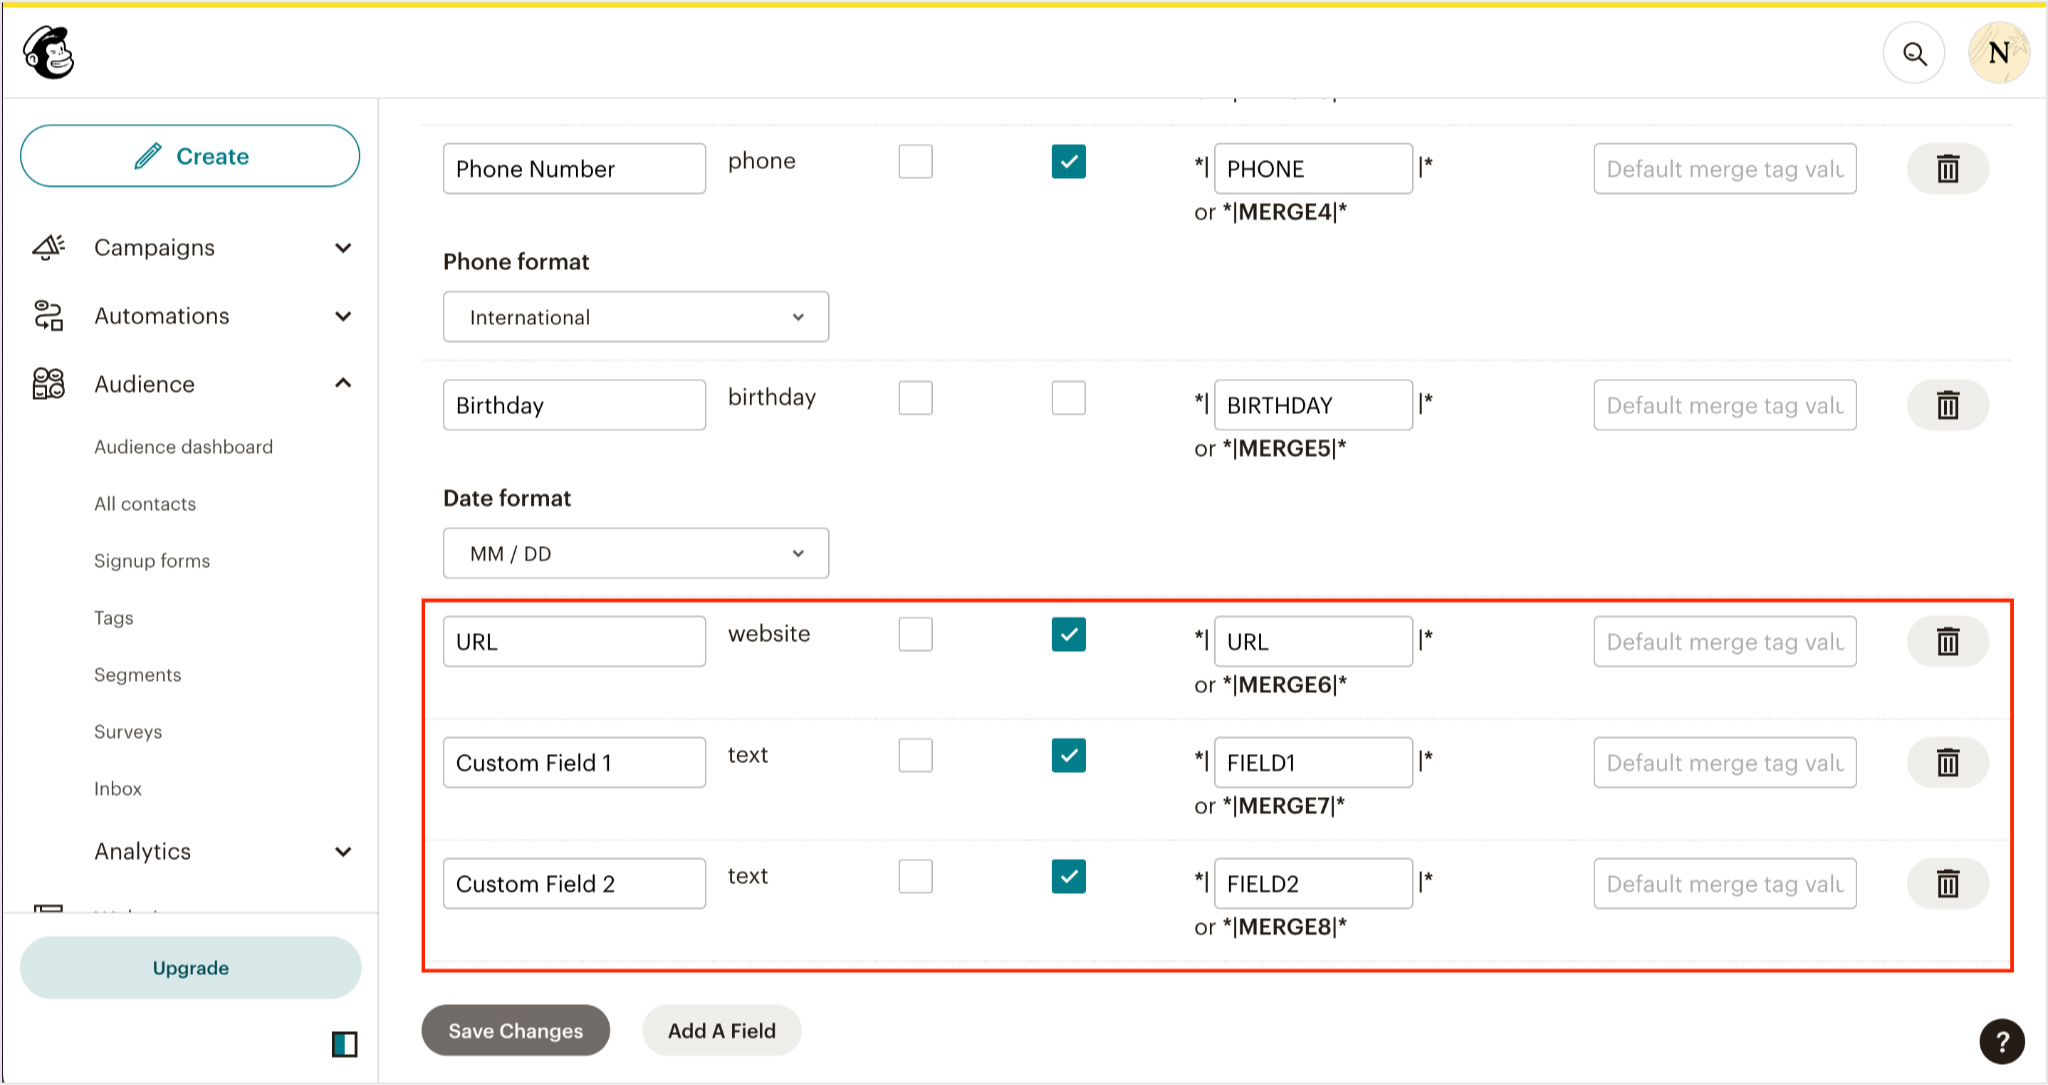 click add a field at the bottom of the list of fields and add the fields you want to send to mailchimp